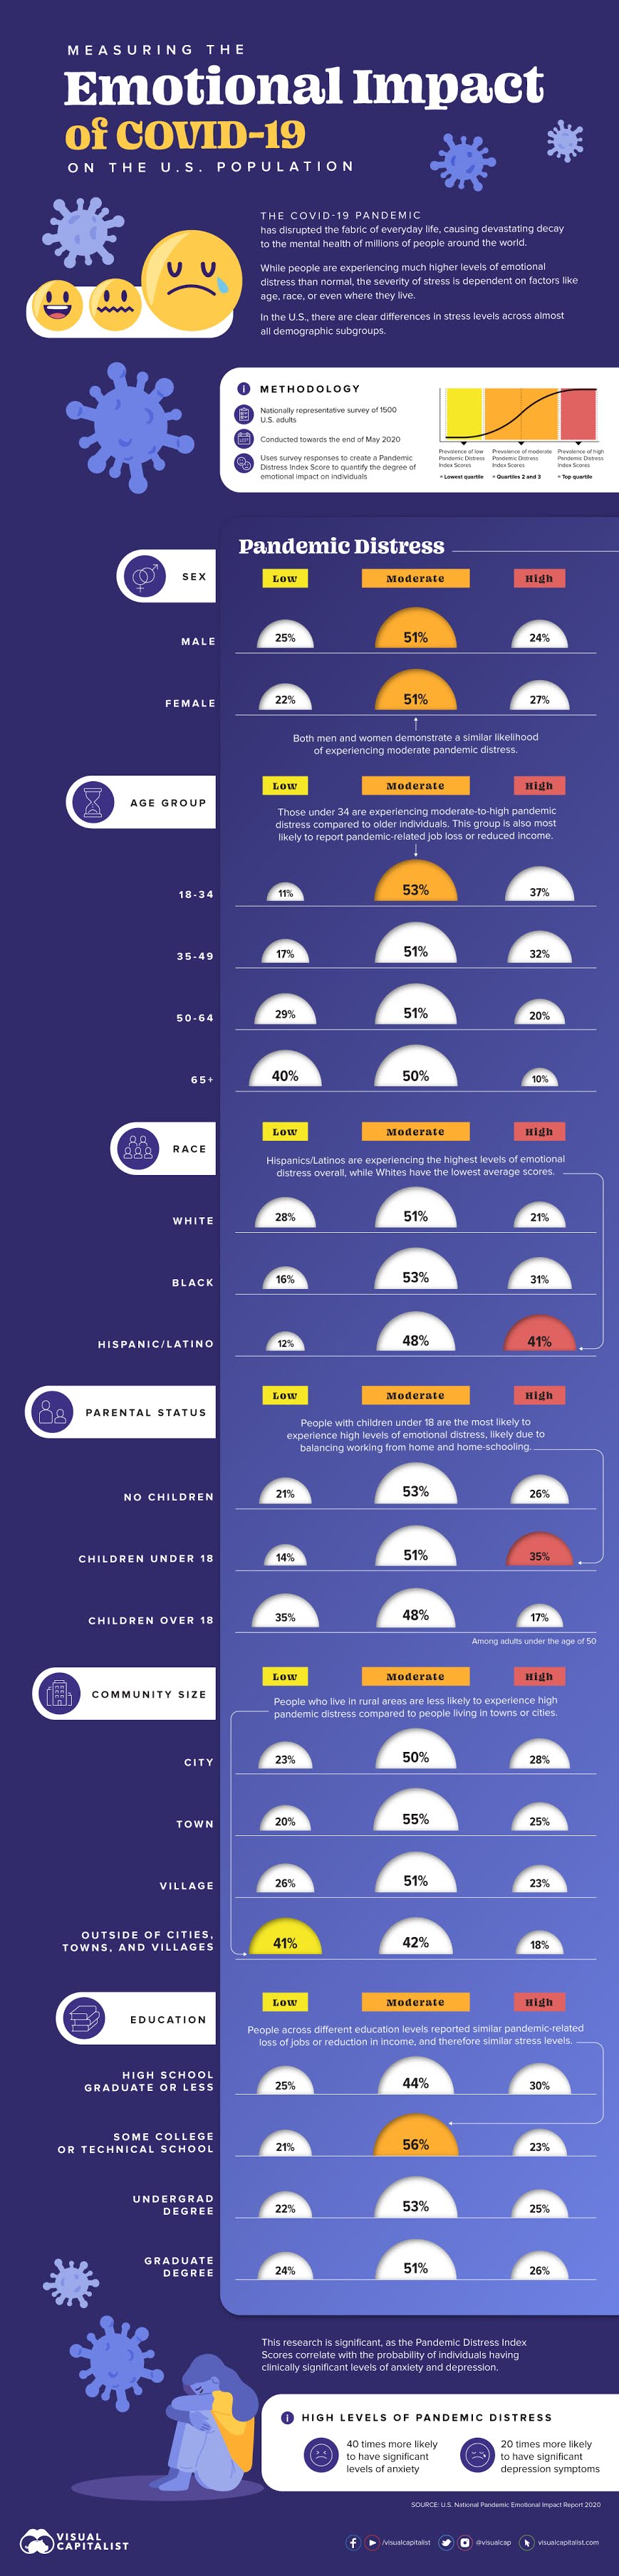 Measuring the Emotional Impact of COVID-19 on the U.S. Population #infographic